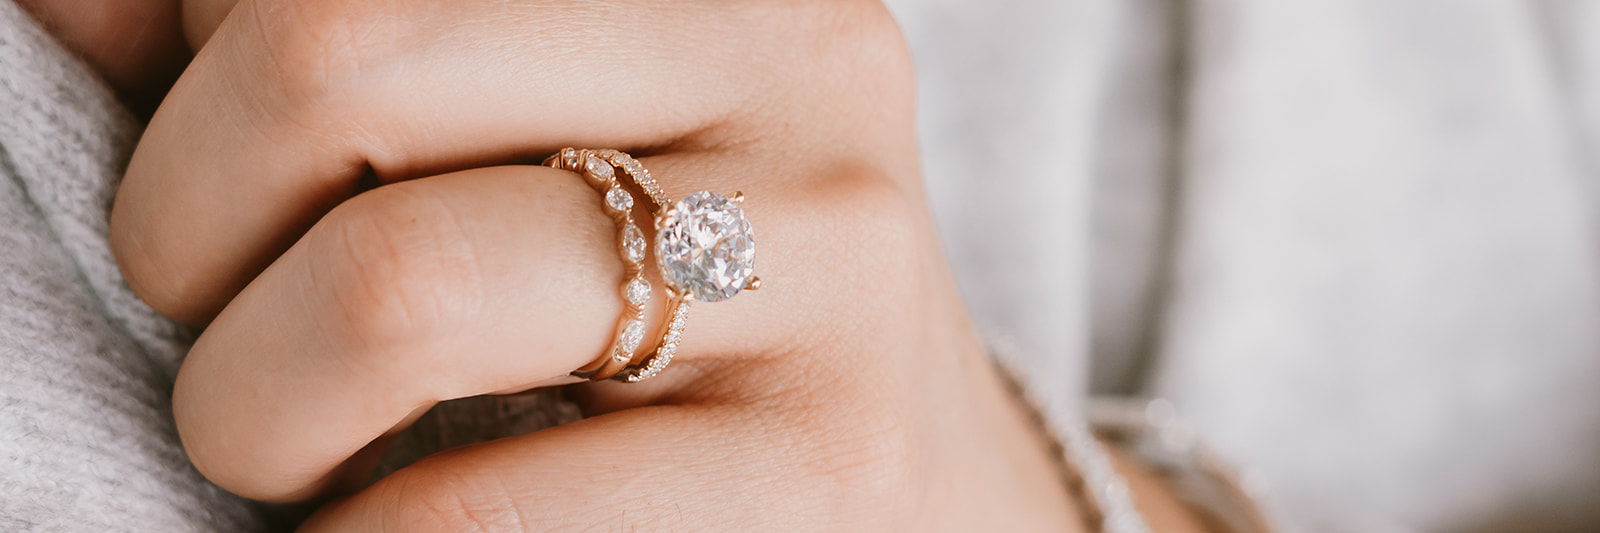 Browse Engagement Rings at Moore Jewelers Laredo, TX